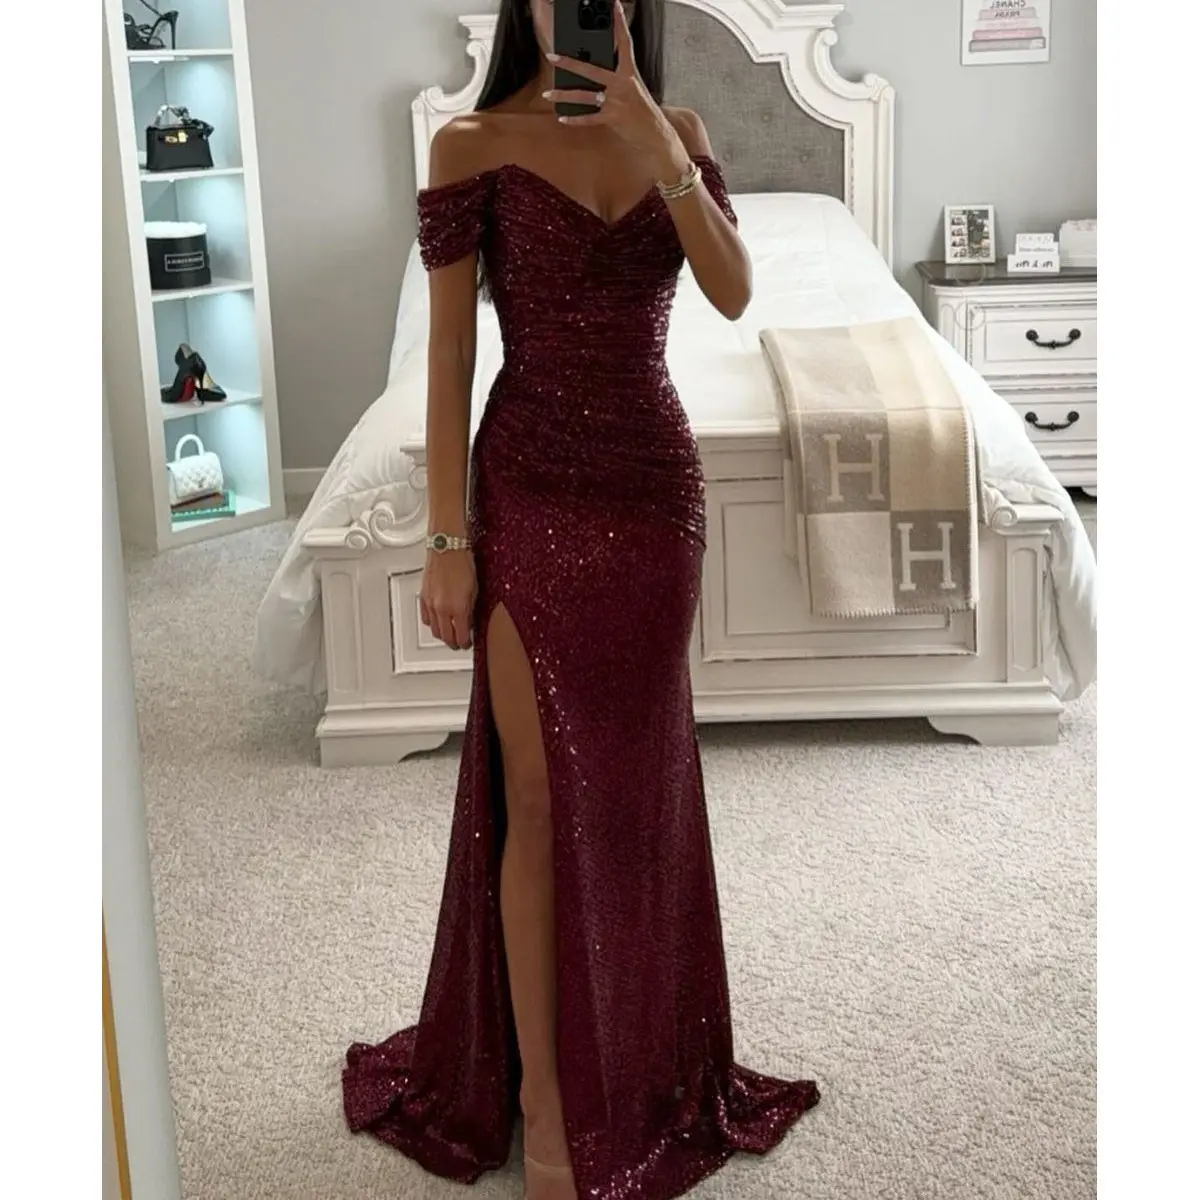 Women's Evening Dress Gold Prom Dress Bling Mermaid Sequined Ladies Formal Wear Gowns